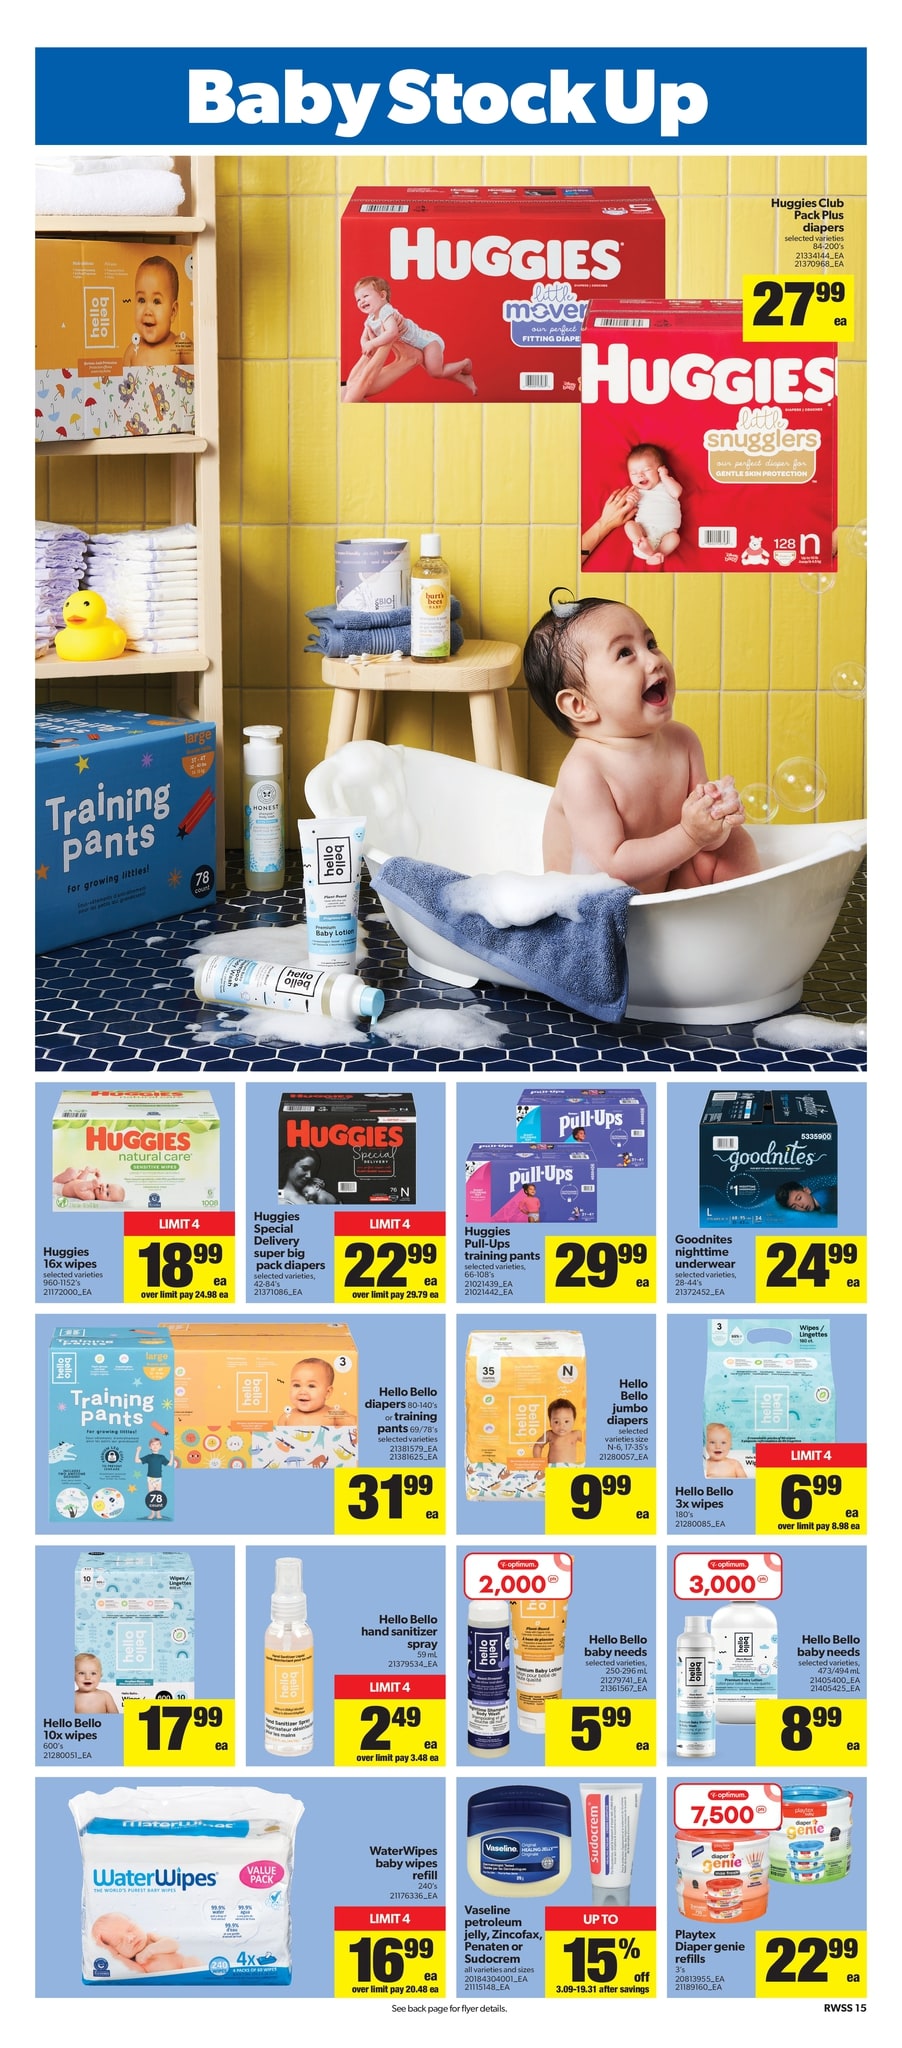 Real Canadian Superstore Western Canada - Weekly Flyer Specials - Page 16